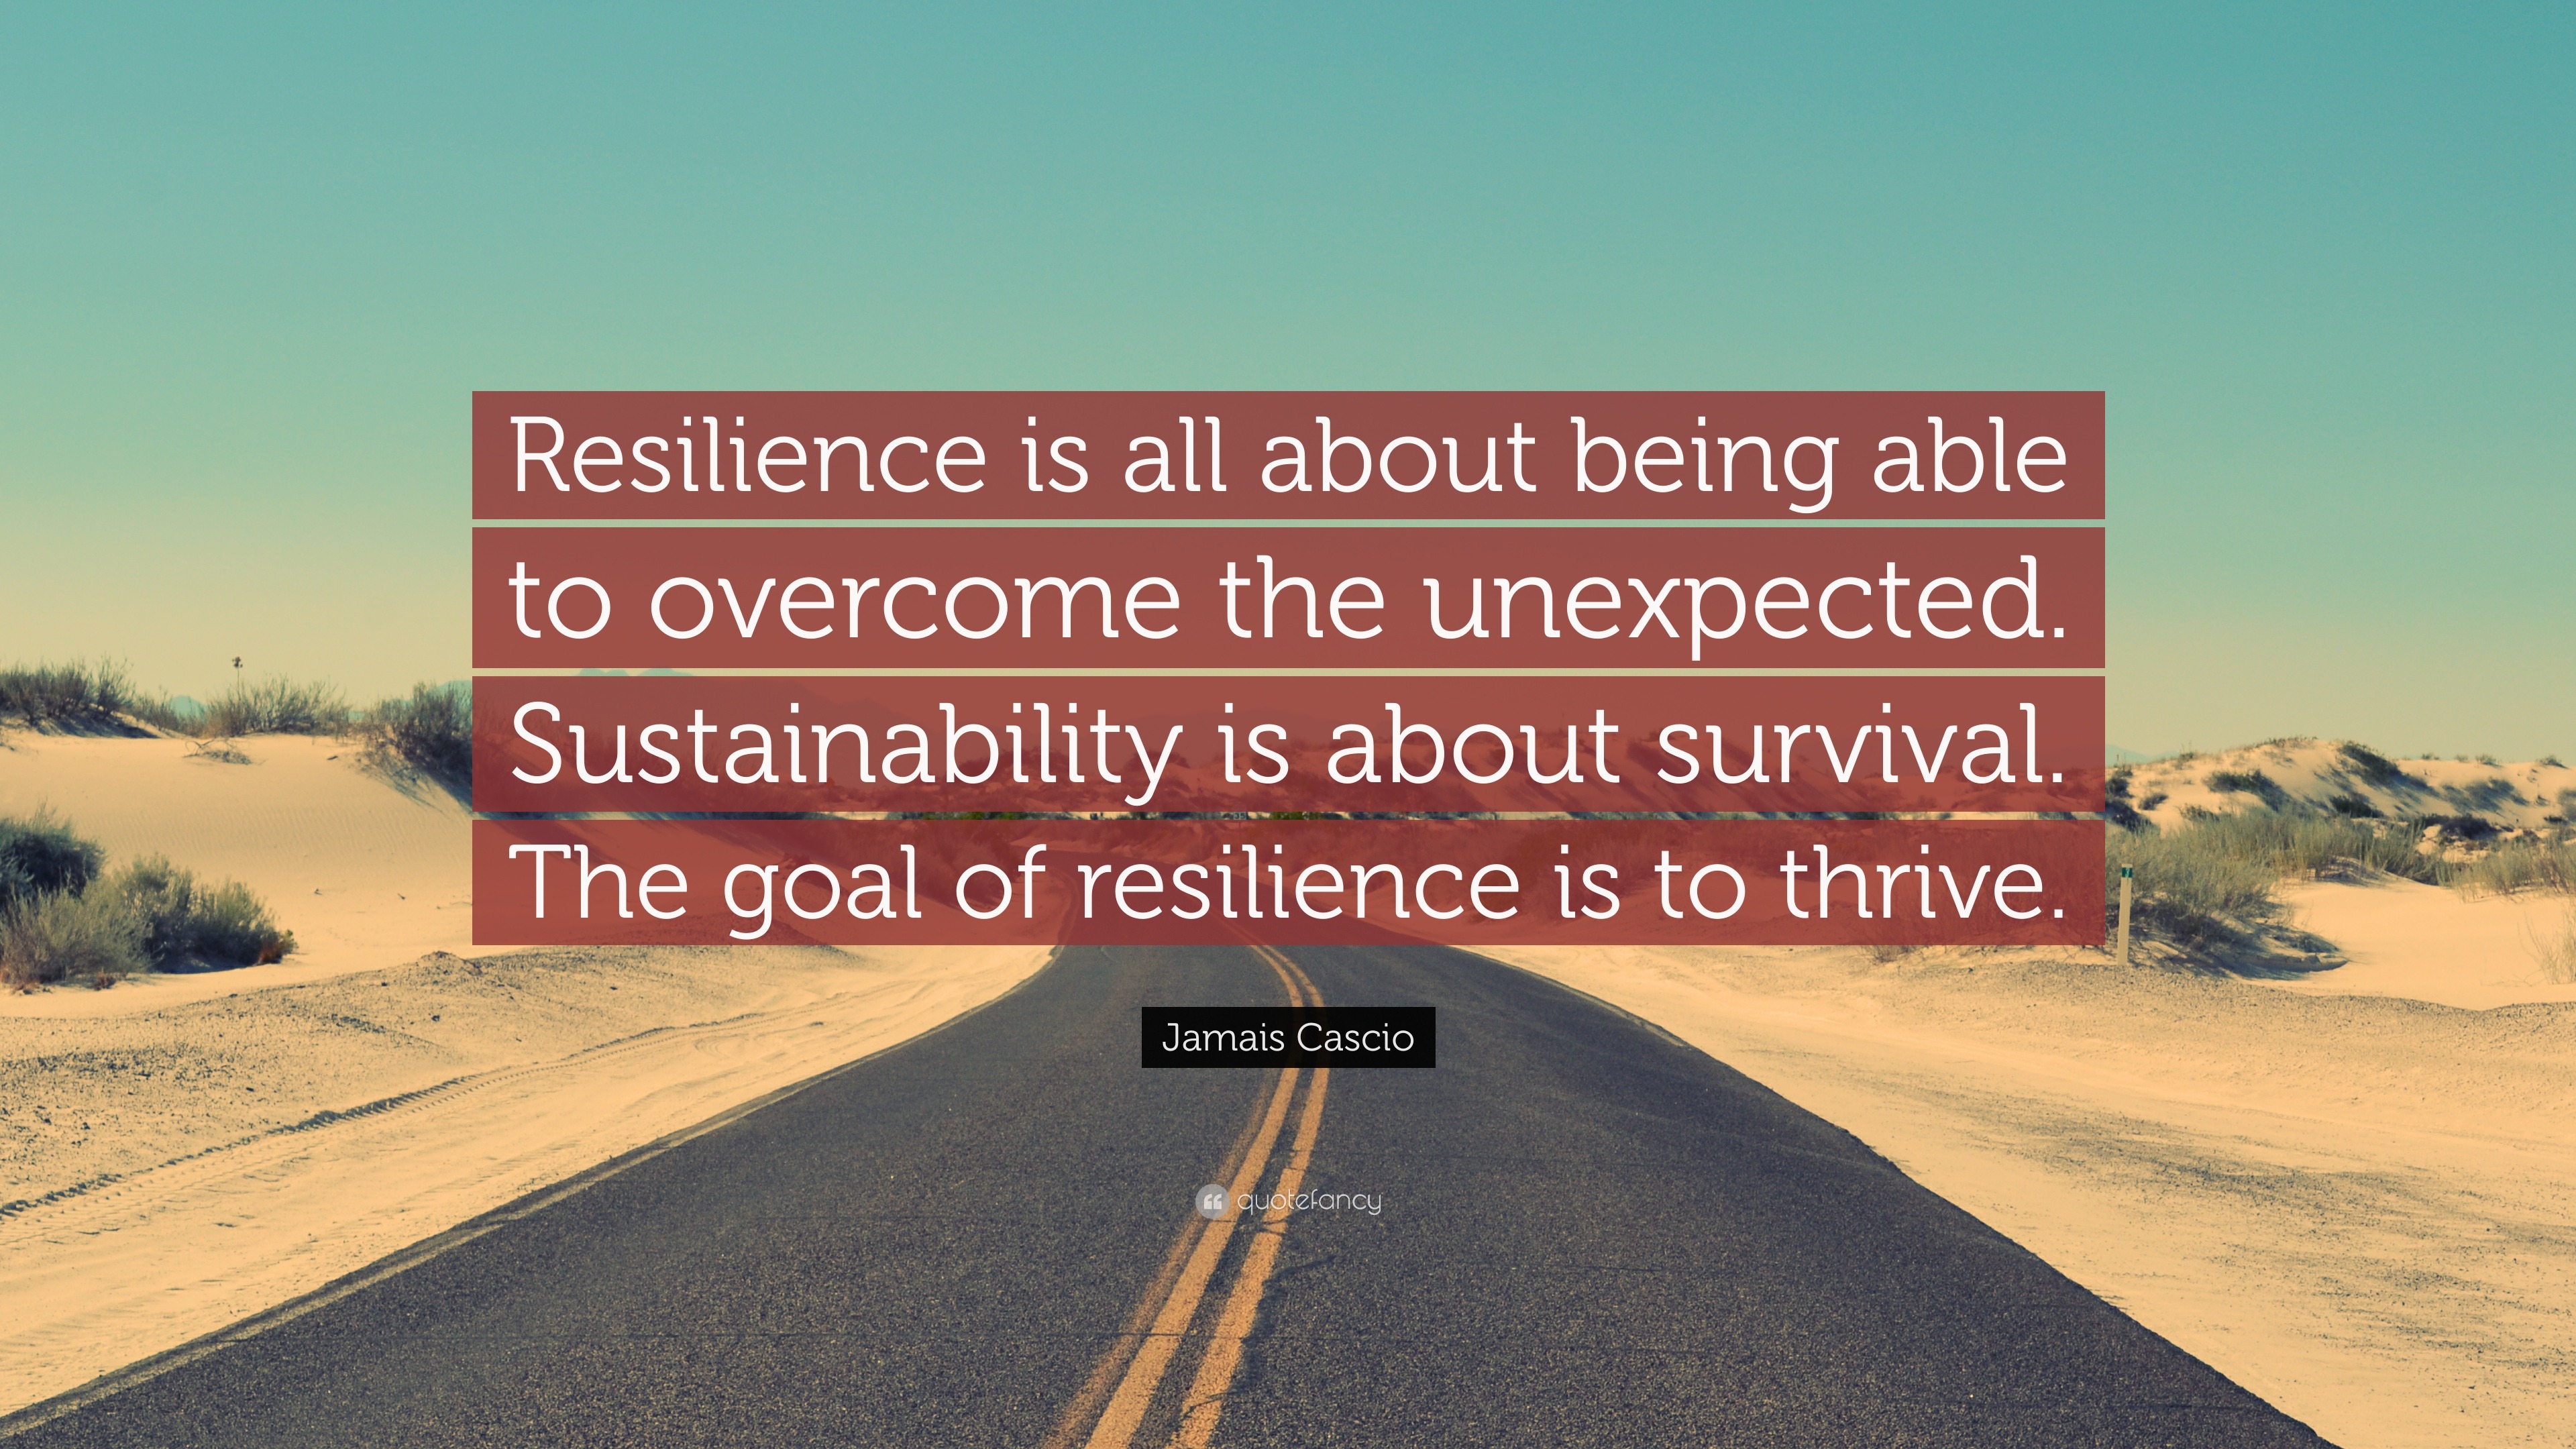 Jamais Cascio Quote “Resilience is all about being able